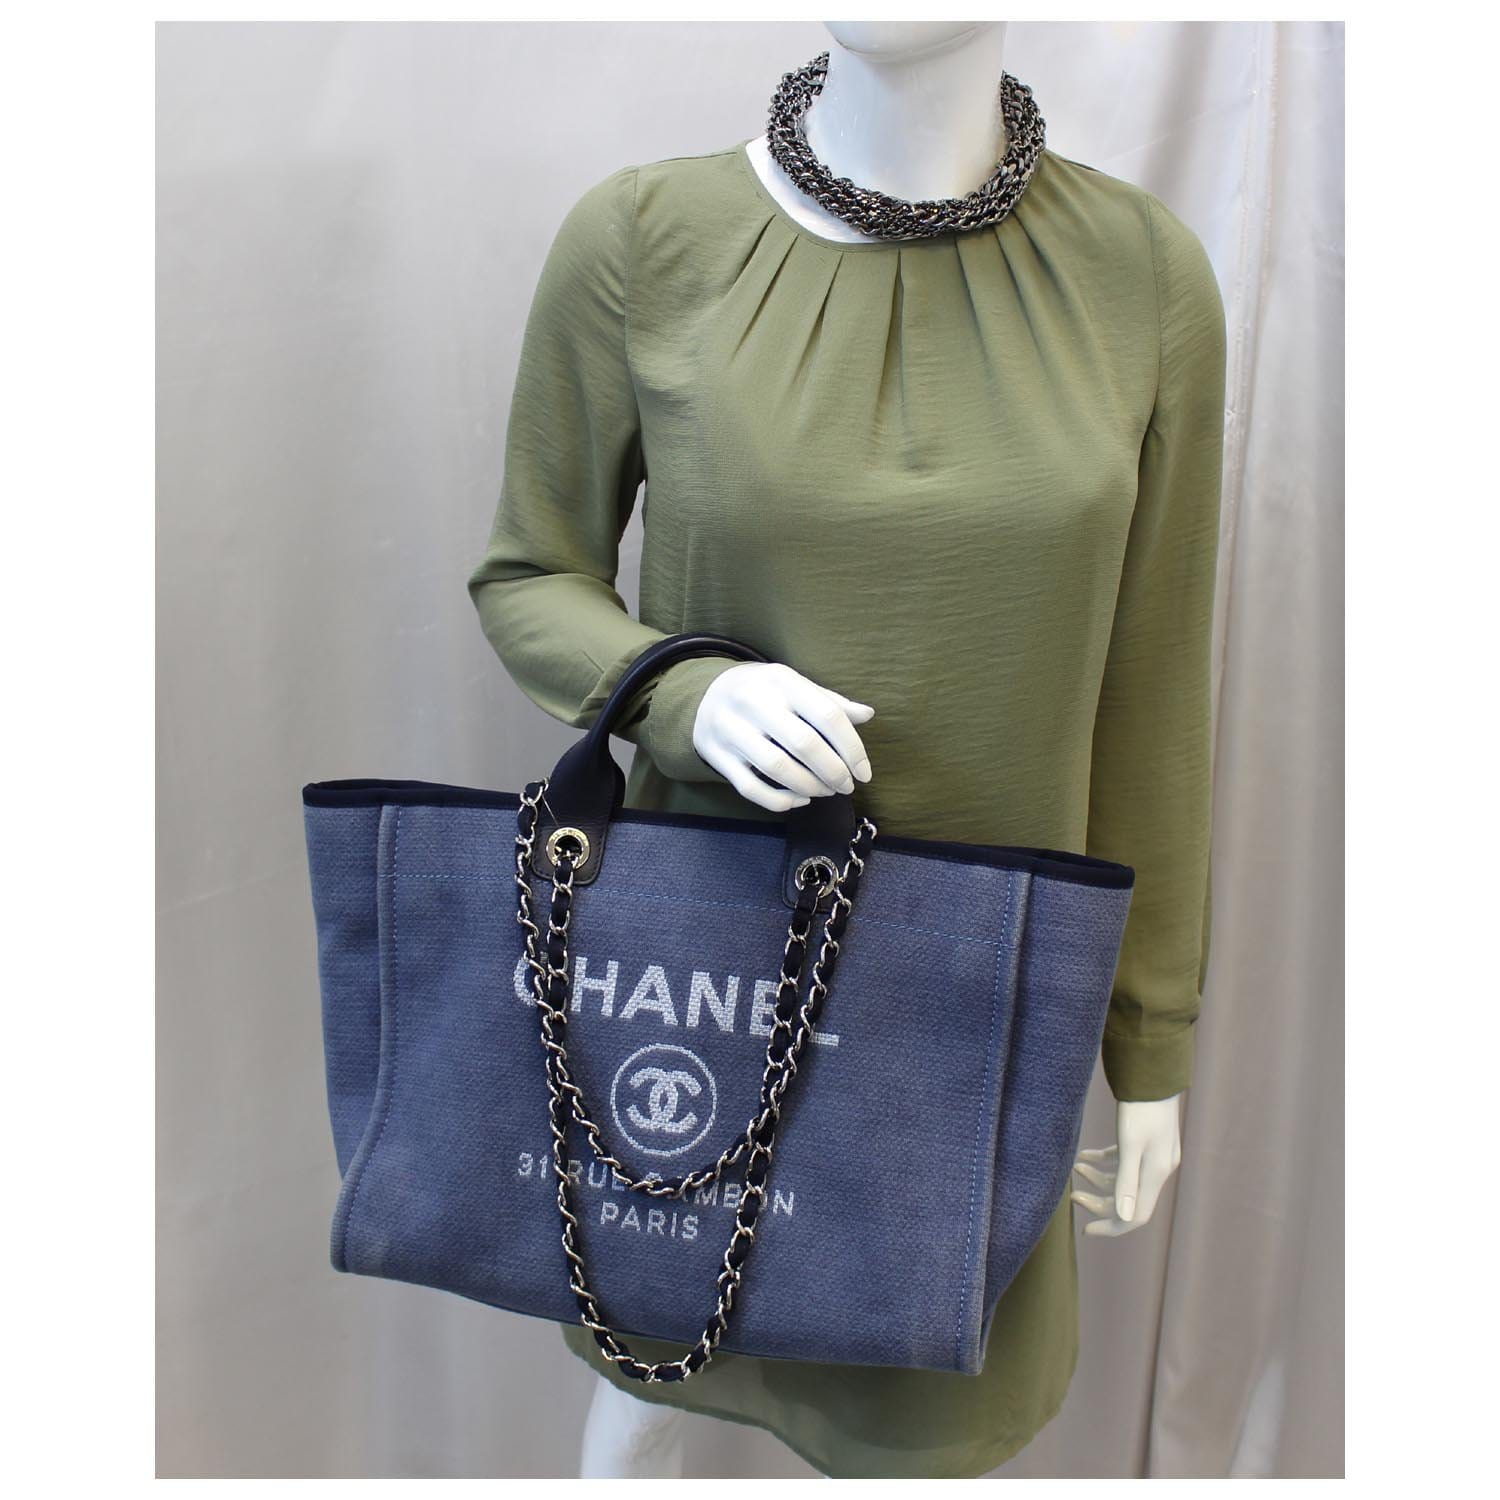 Chanel Deauville Tote Canvas Bag B966# Blue